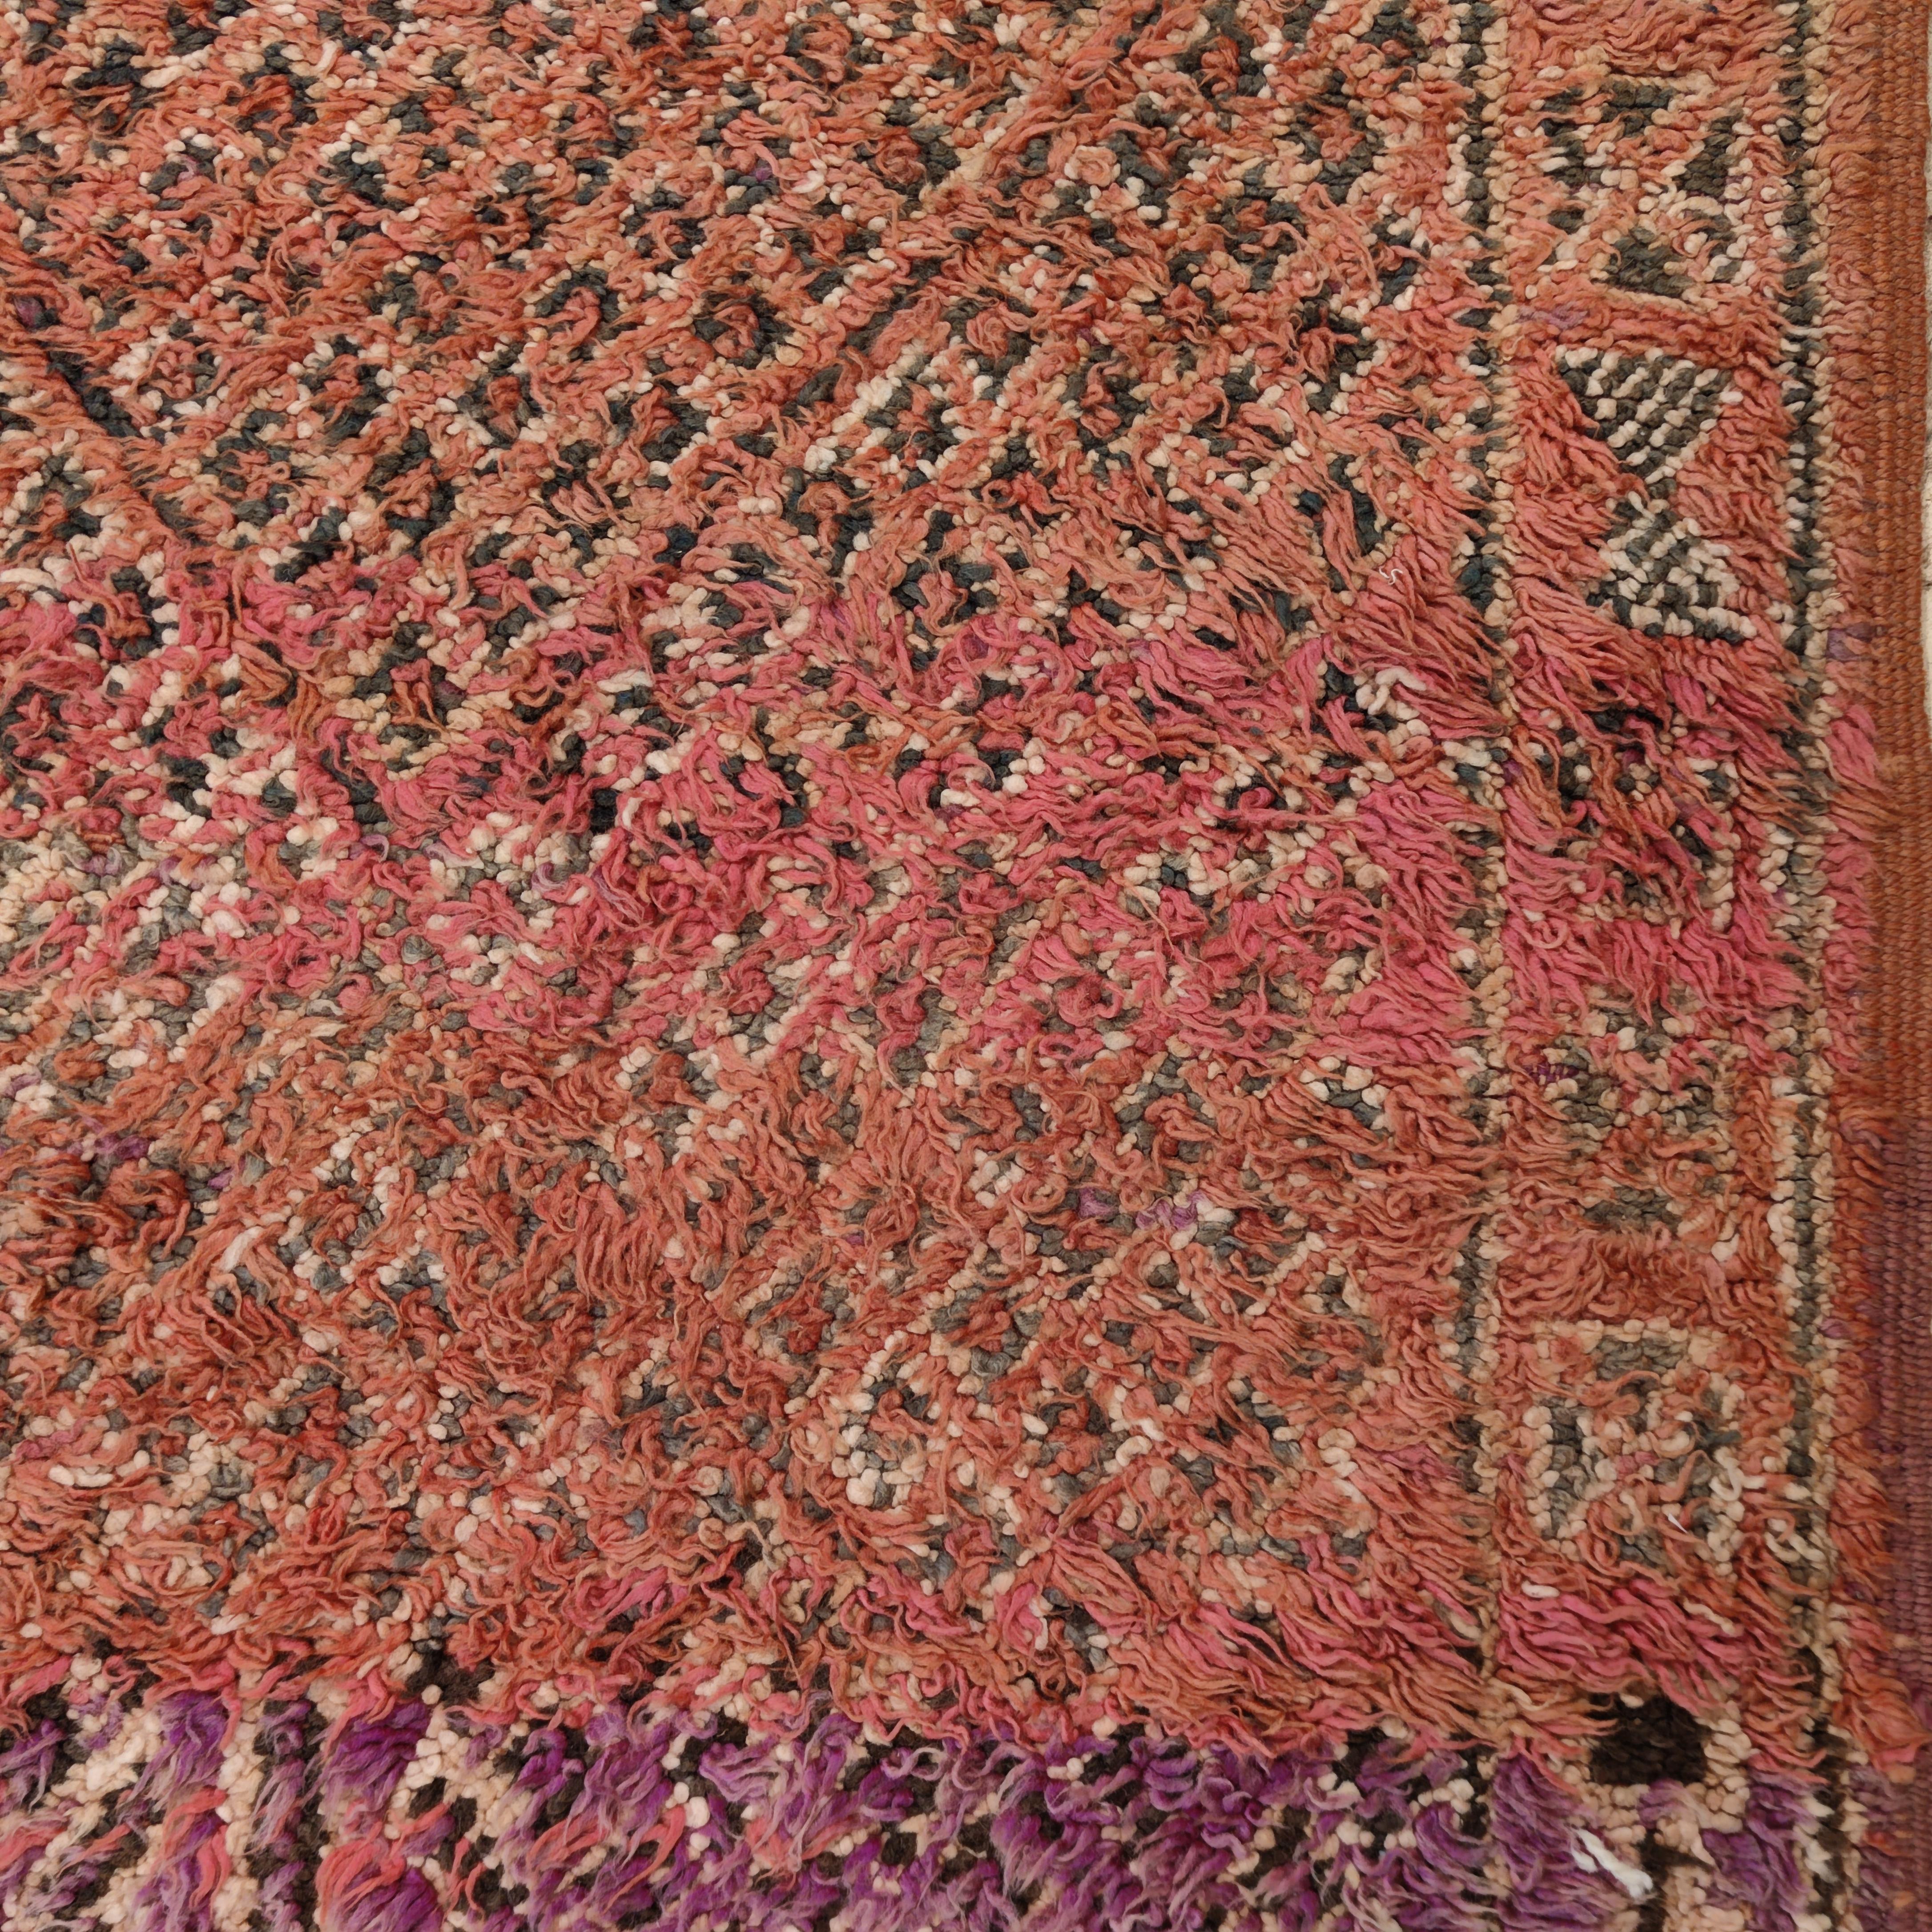 Stunning Vintage Beni Mguild Moroccan Berber Rug in Rainbow Colours In Excellent Condition For Sale In Milan, IT